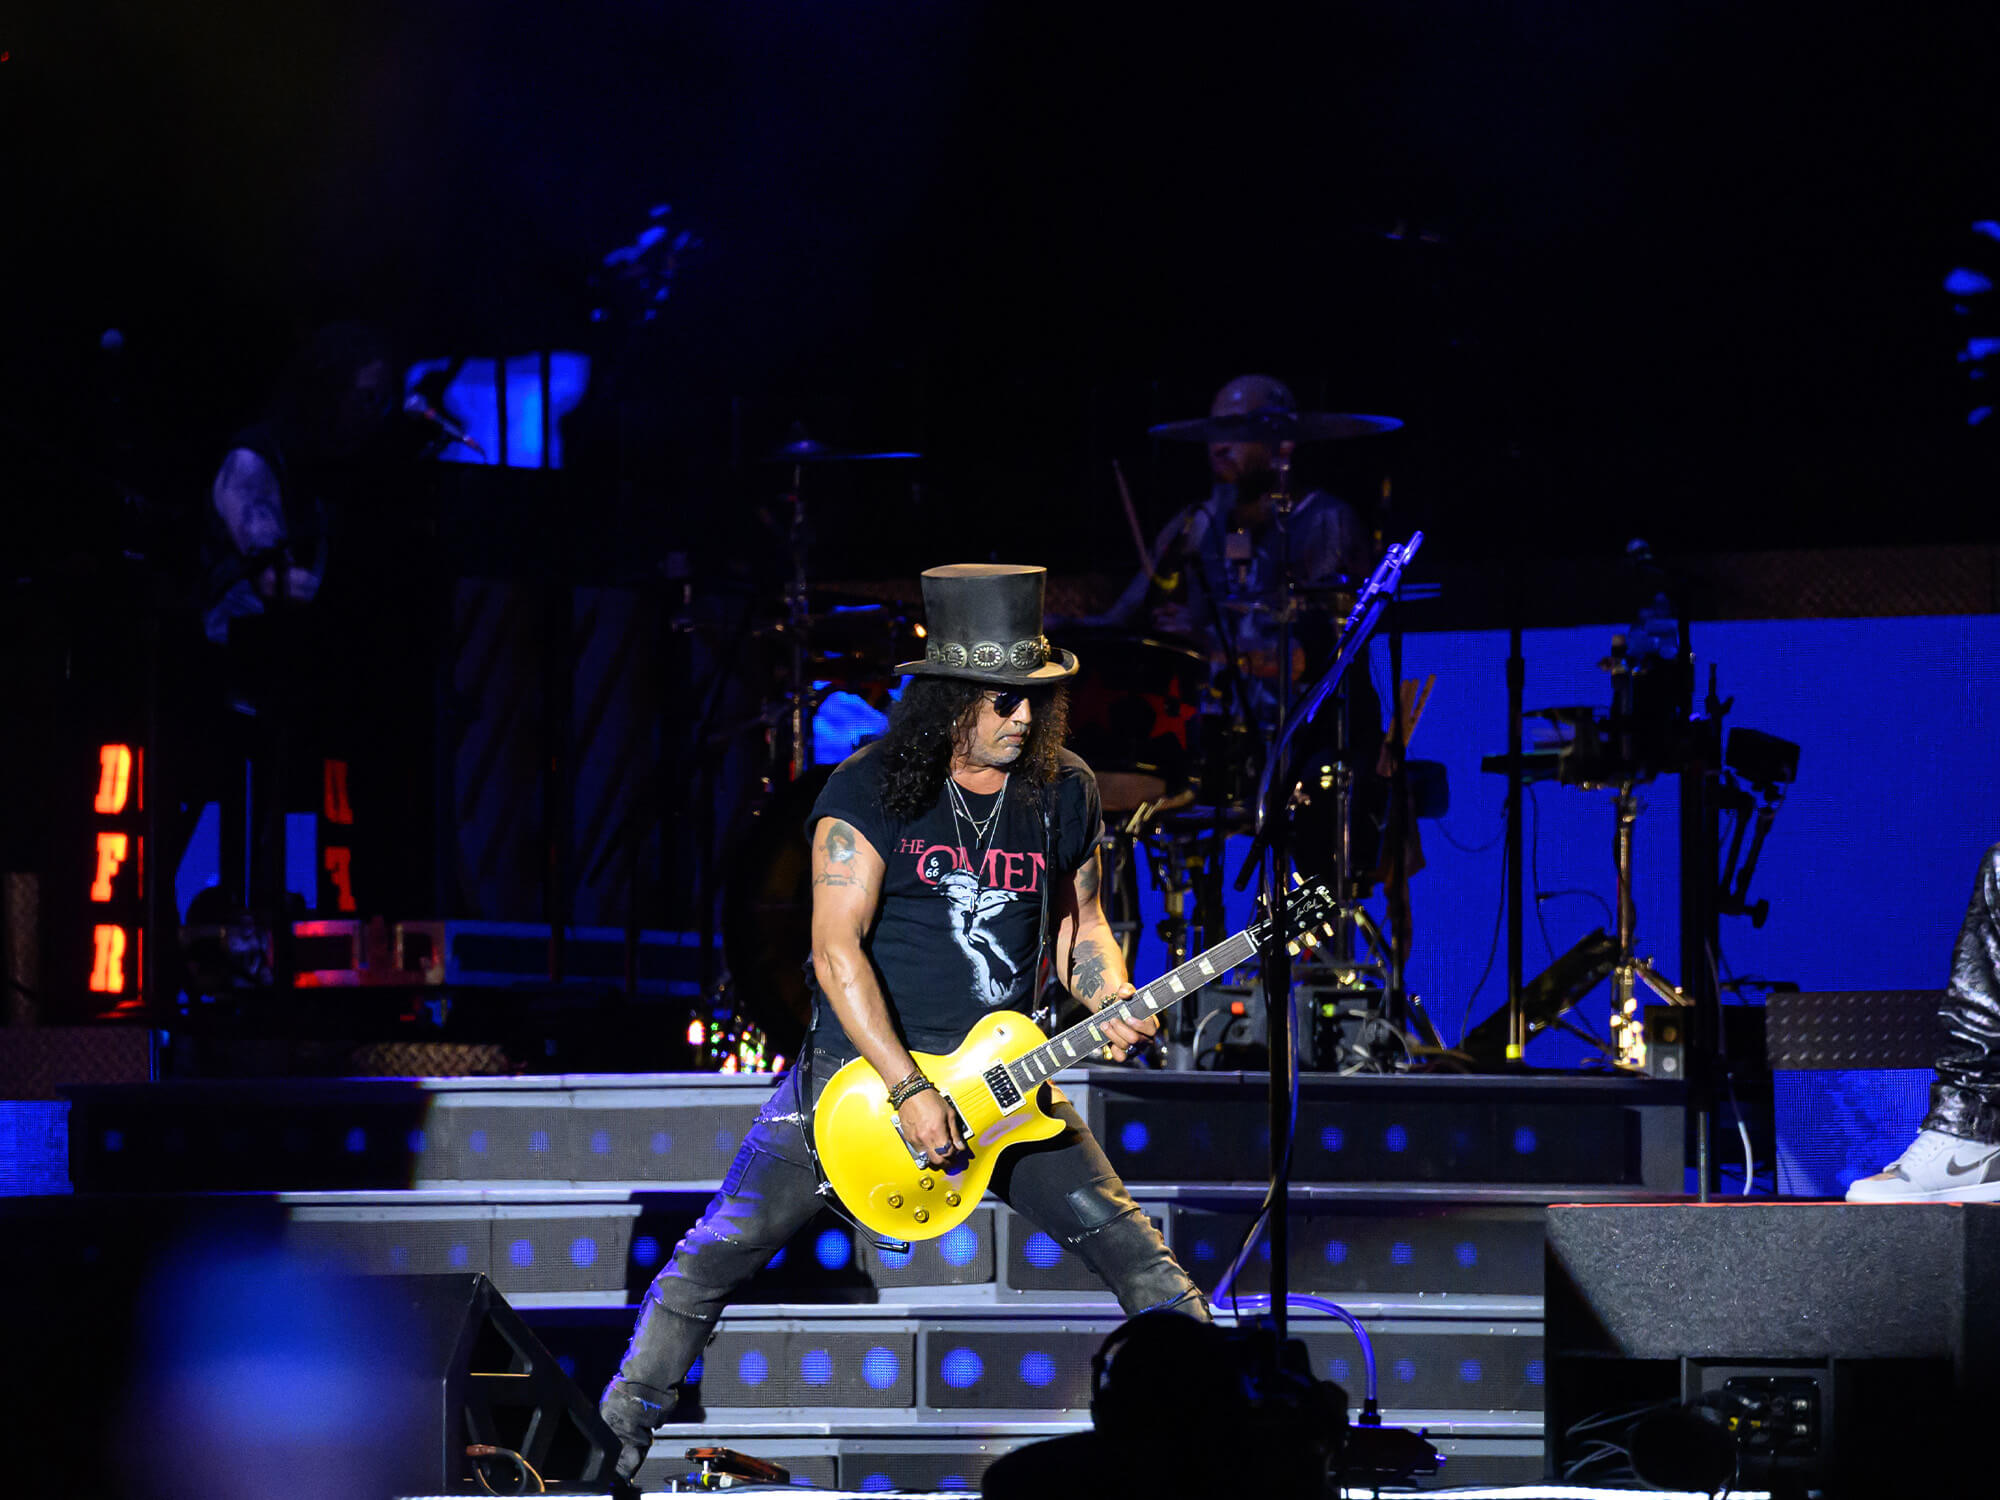 Slash on stage, he is wearing his famous top hat and stands with his legs spread slightly apart as he plays a Gibson Les Paul